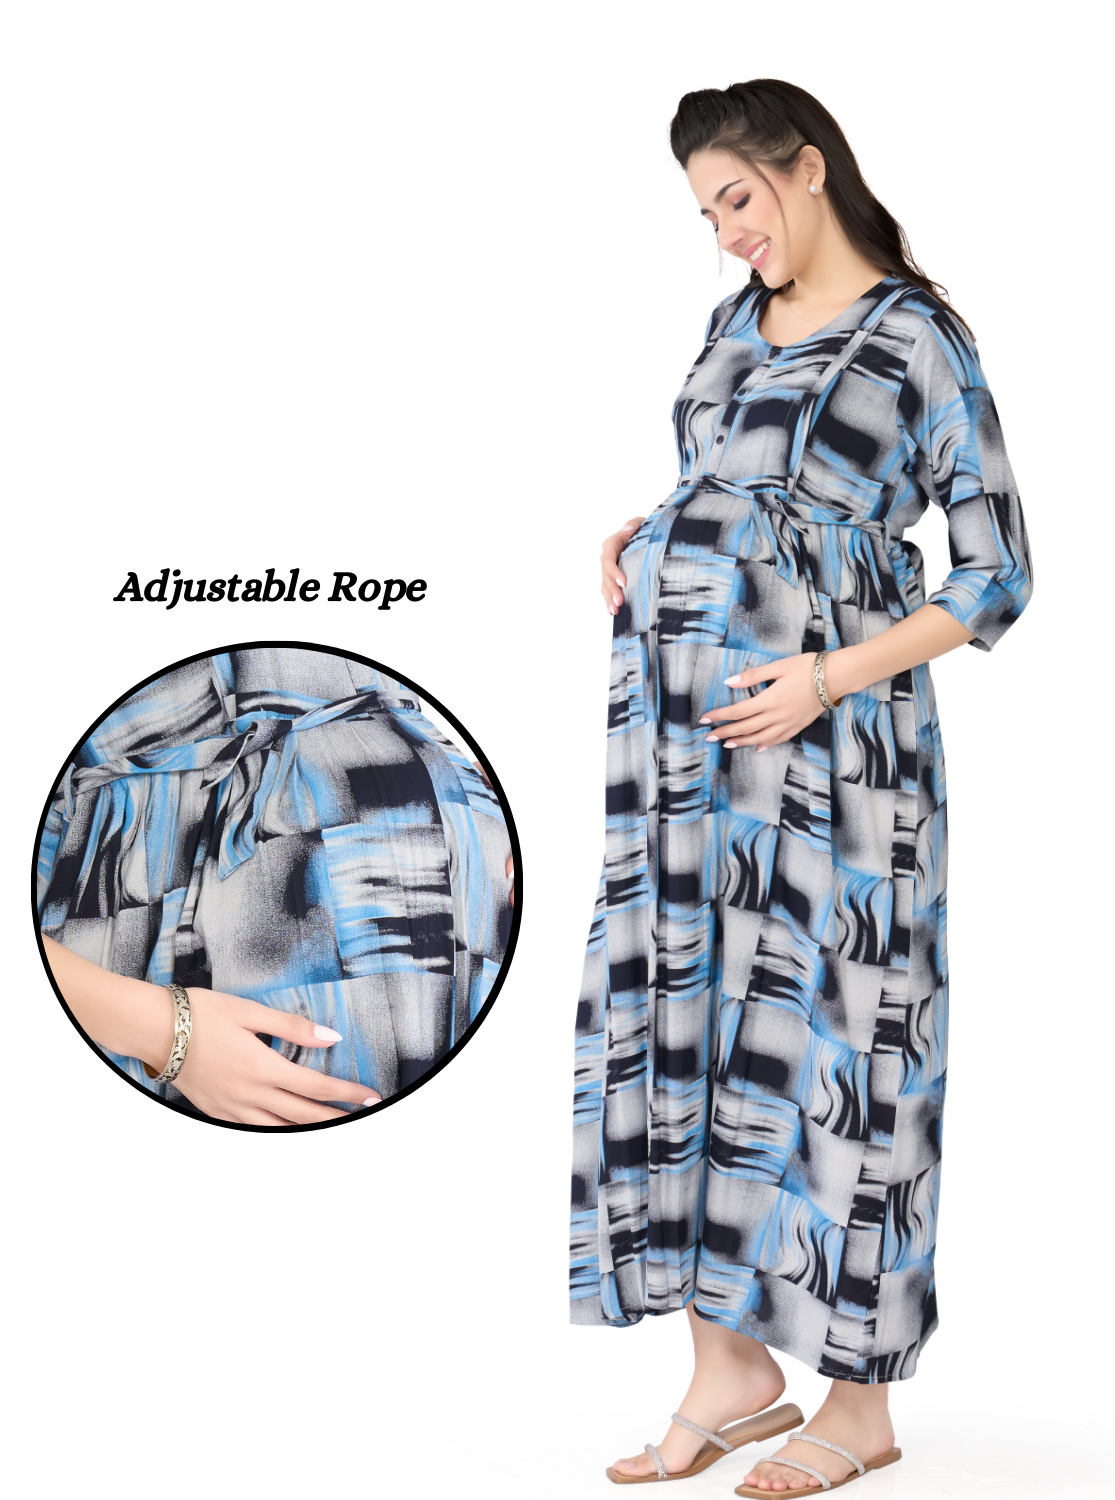 ONLY MINE Premium MAXI Mom's Wear - Soft & Smooth Rayon | Maternity | Feeding | Maxi Model | Casual Wear for Pregnancy Women's